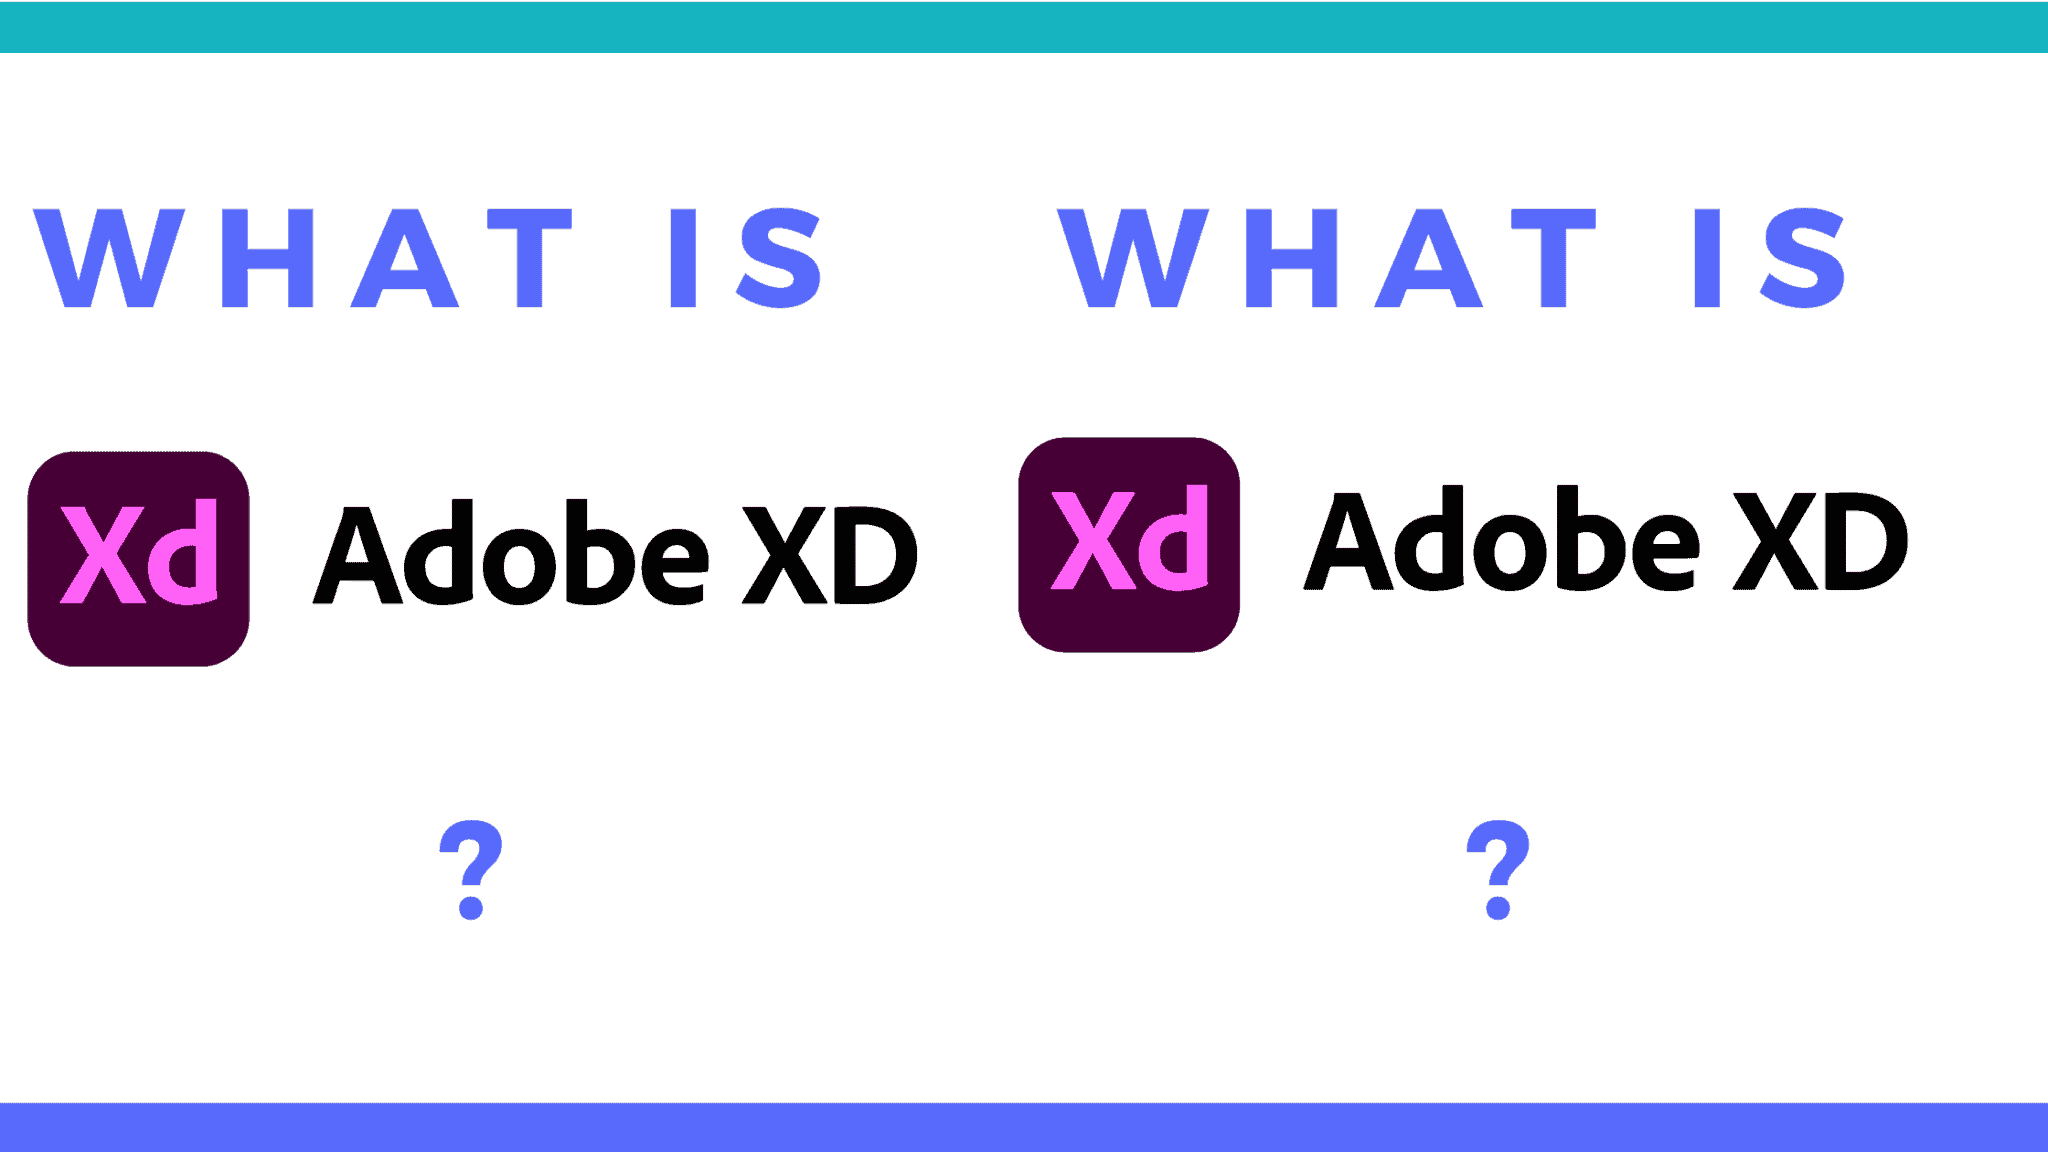 what is Adobe XD?